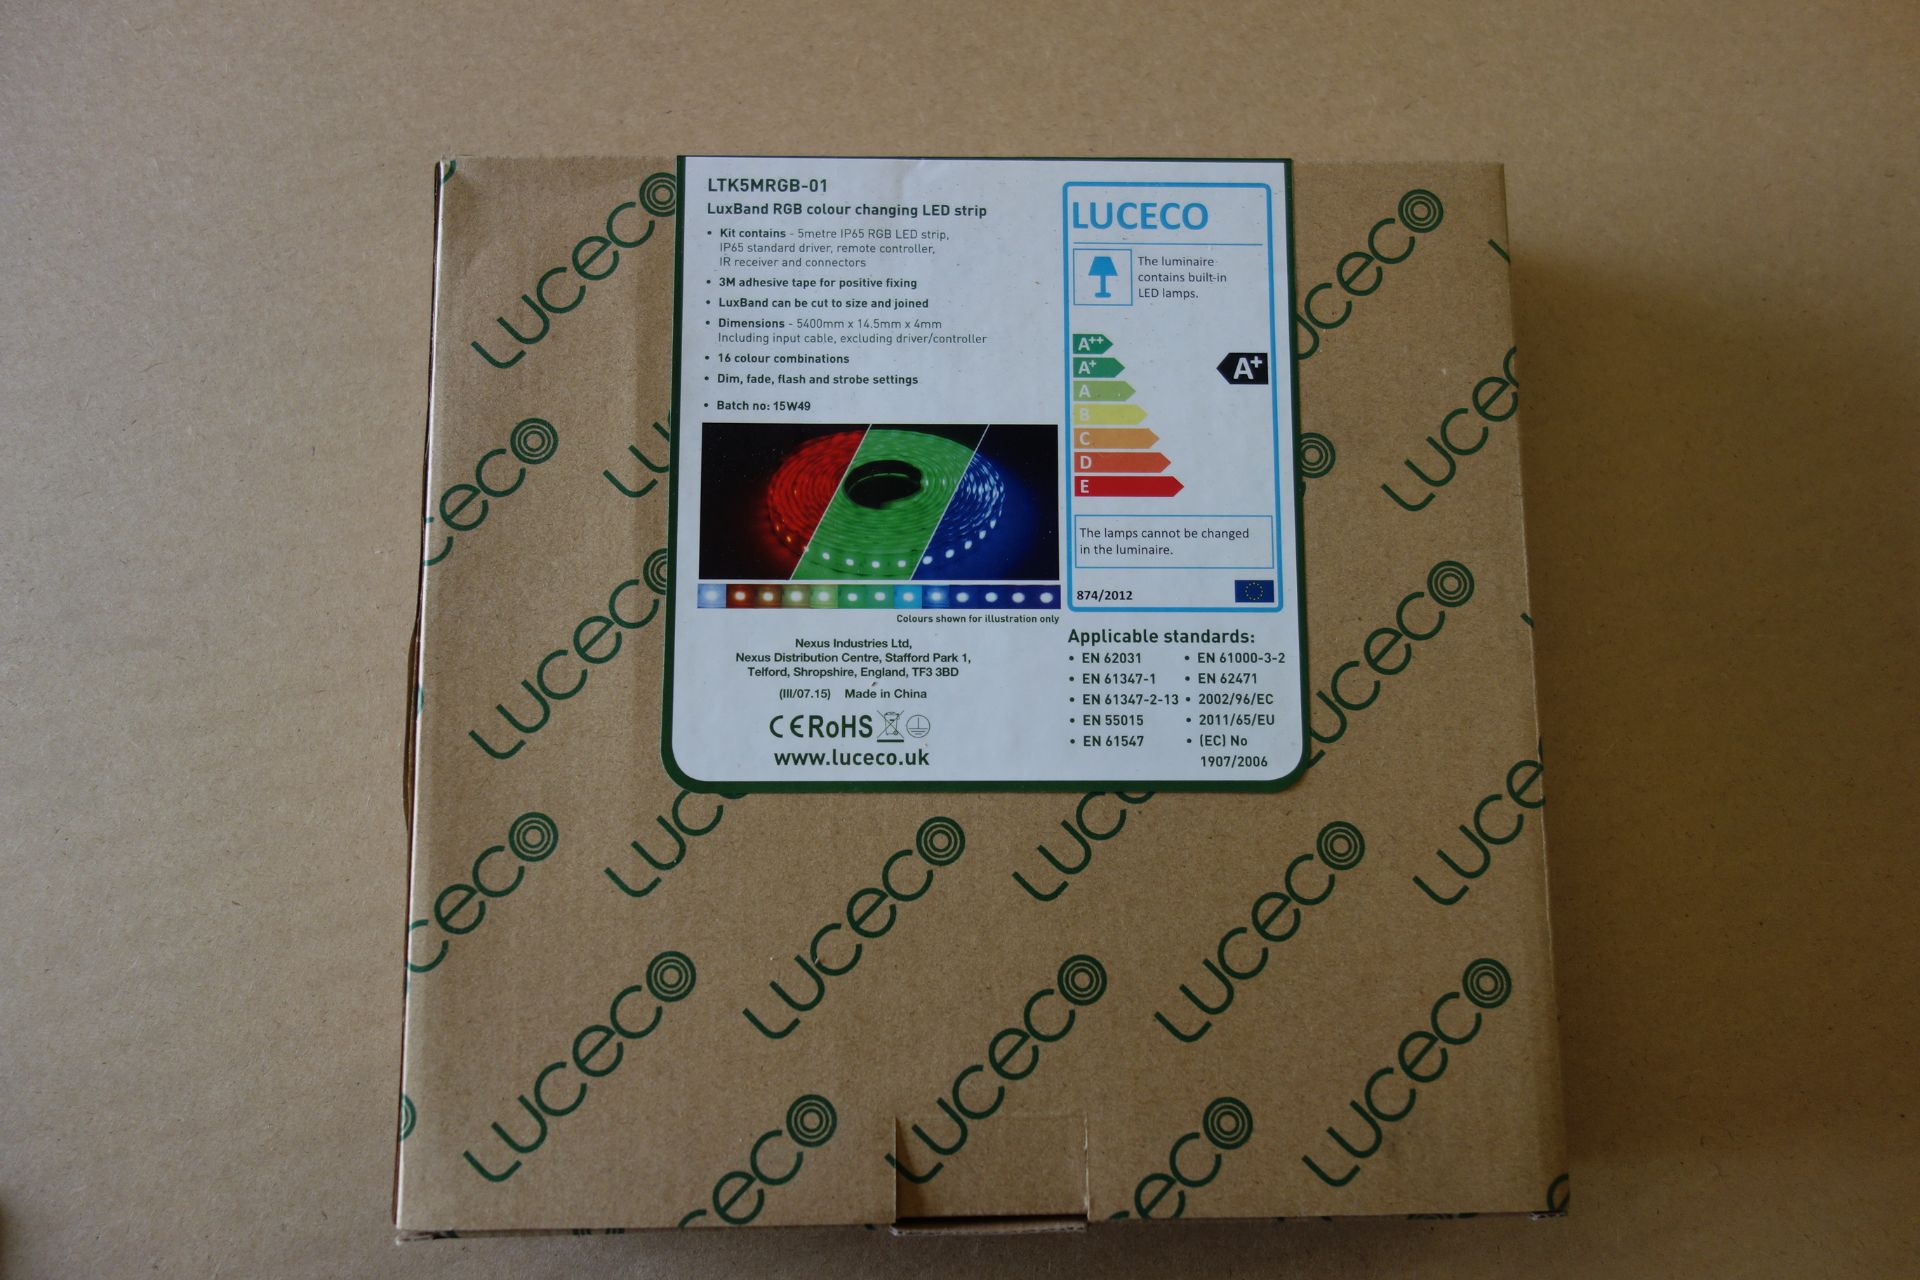 5 X Luceco LTK5MRGB-01 LUX-Band RGB Colour Changing LED Strip IP65 C/W Driver Romote Controller IR